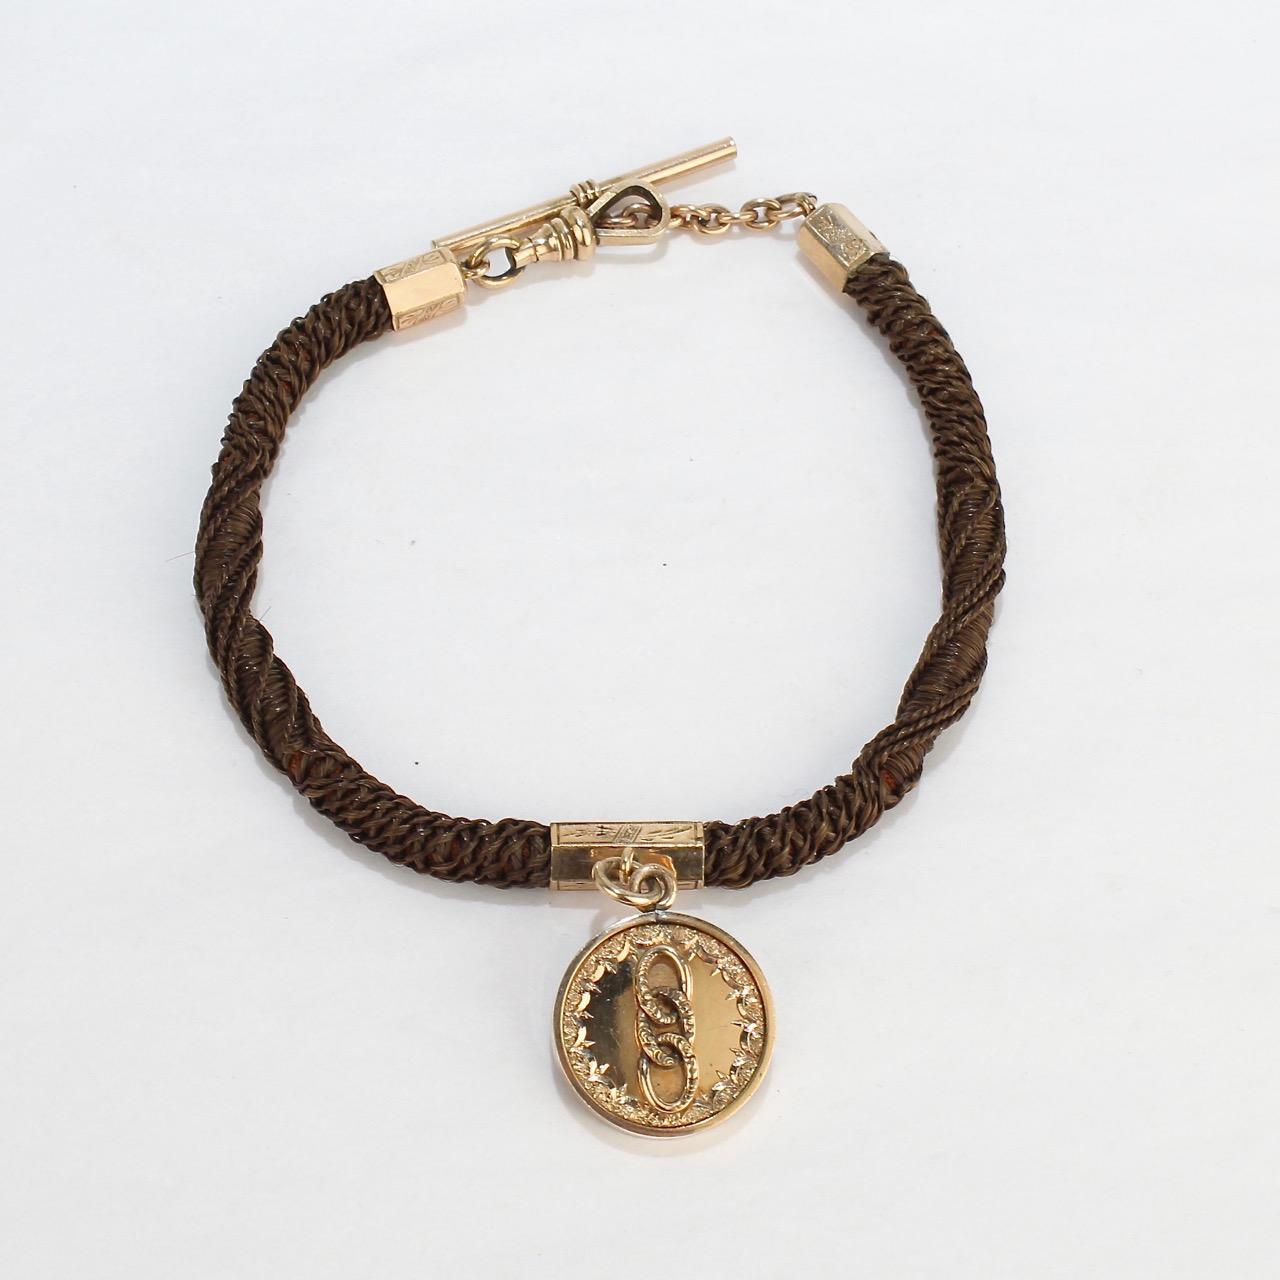 An antique Victorian memorial watch chain of woven hair.

Mounted with gold-filled findings and set with a gold-filled medallion that likely is an Odd Fellows fraternal coin.

The coin itself has a cityscape scene with a castle on one side and 3